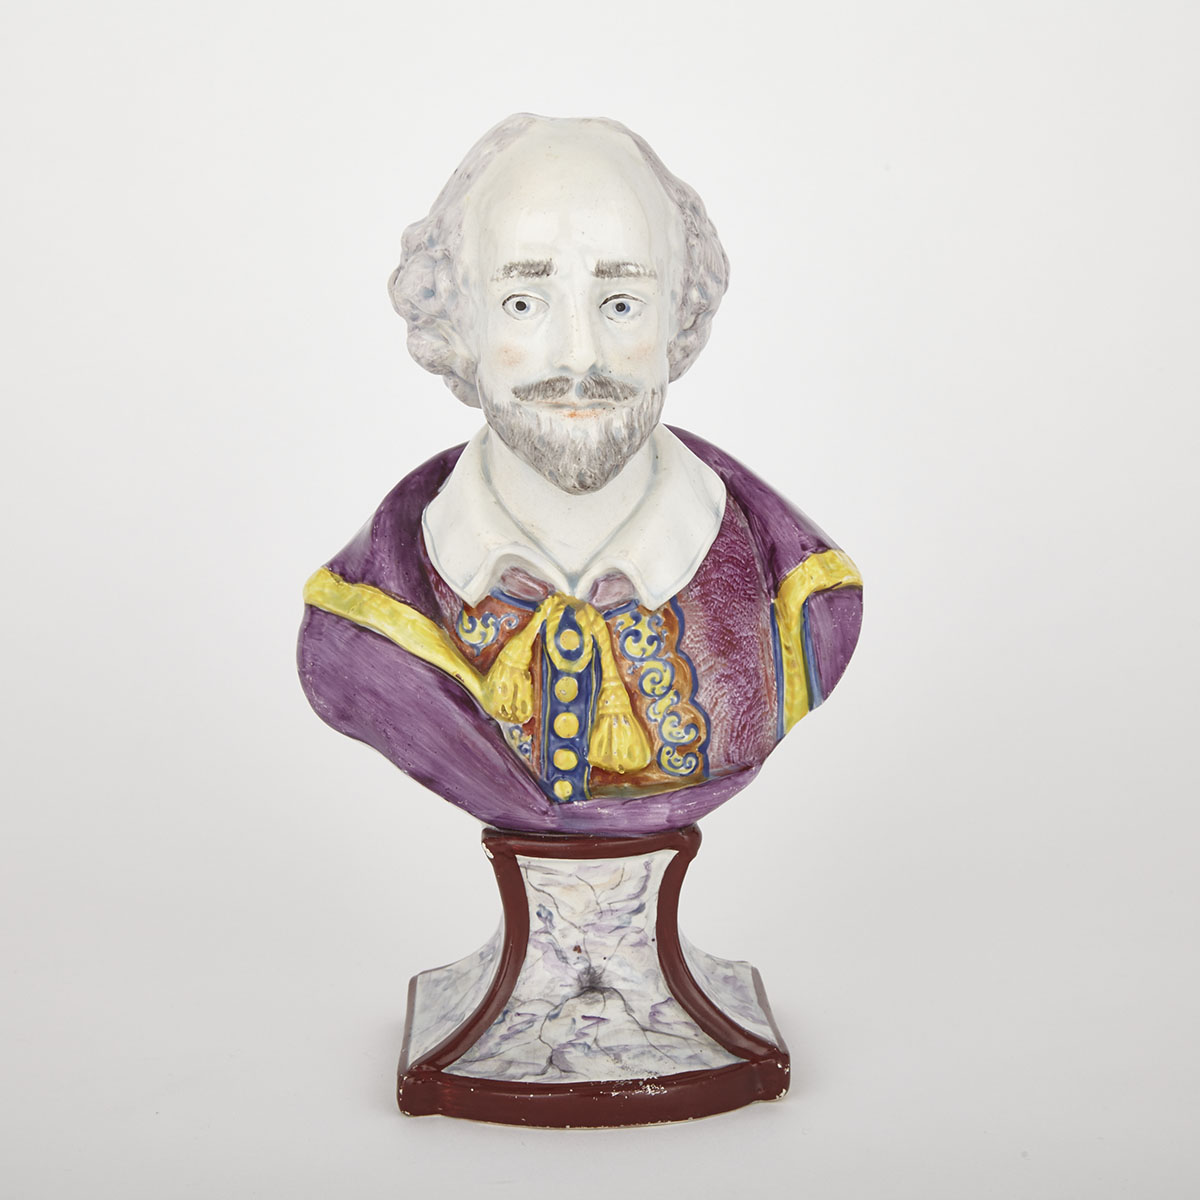 Staffordshire Pearlware Bust of William Shakespeare, William Walker, dated 1828